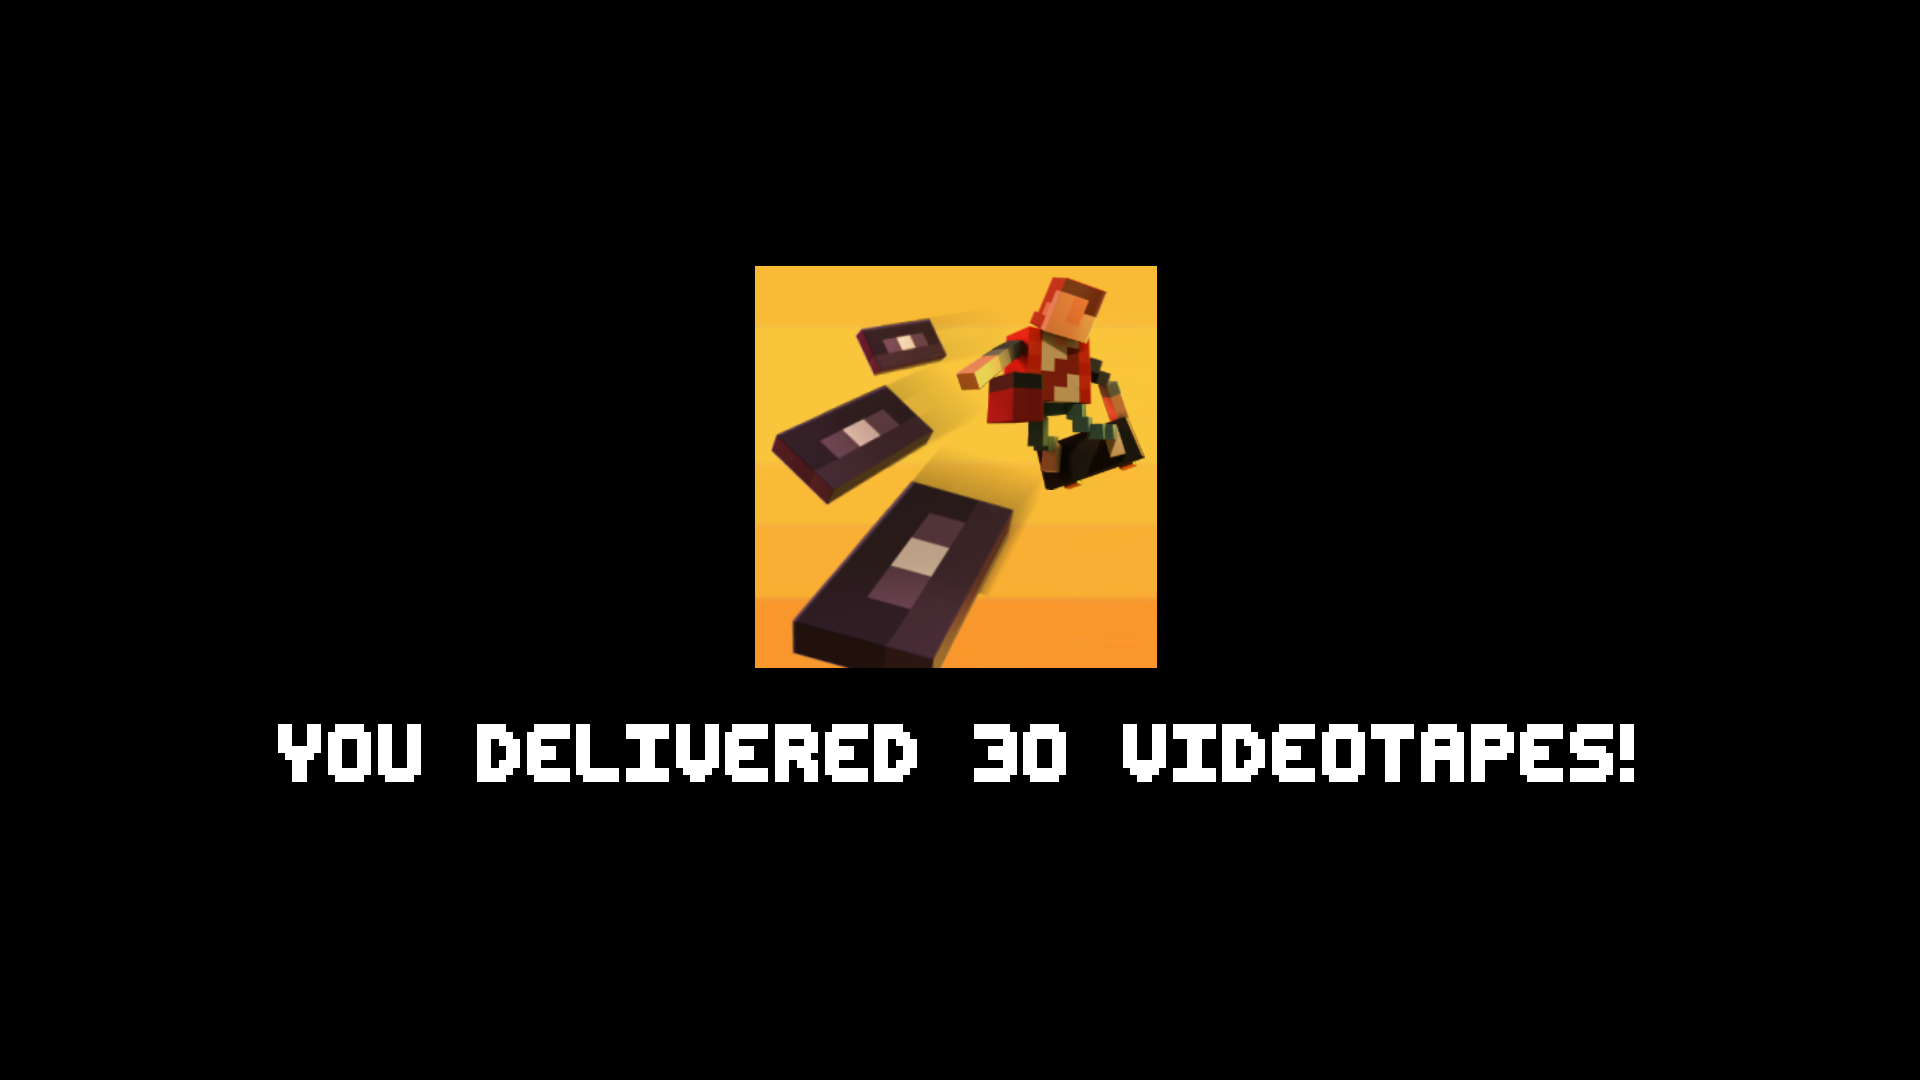 Icon for YOU DELIVERED 30 VIDEO TAPES!